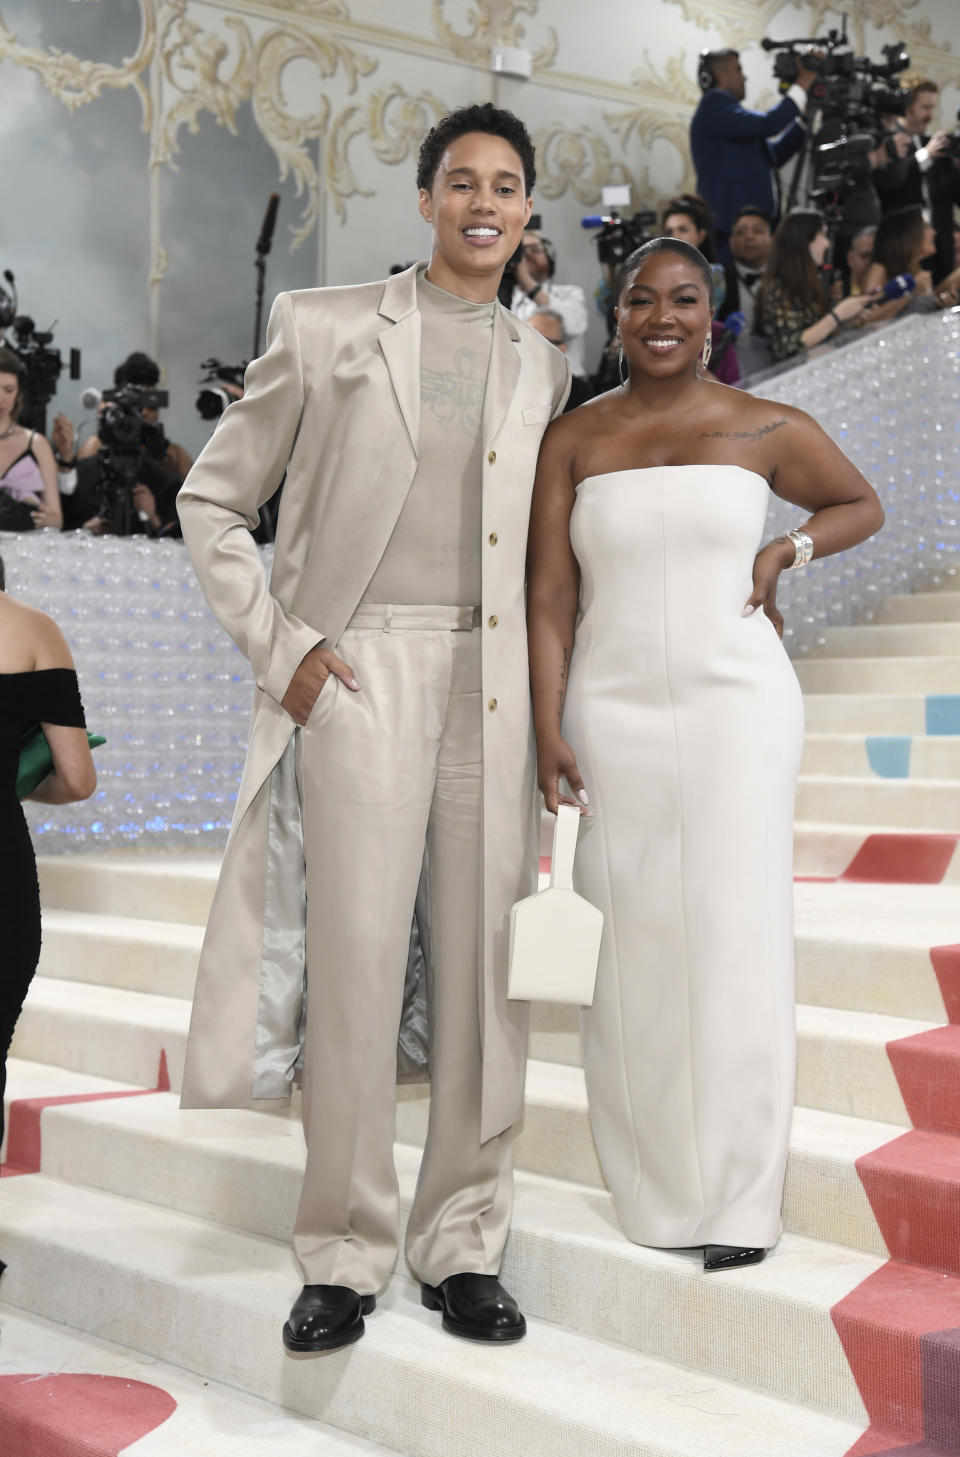 Brittney Griner, left, and Cherelle Griner attend The Metropolitan Museum of Art's Costume Institute benefit gala celebrating the opening of the "Karl Lagerfeld: A Line of Beauty" exhibition on Monday, May 1, 2023, in New York. (Photo by Evan Agostini/Invision/AP)